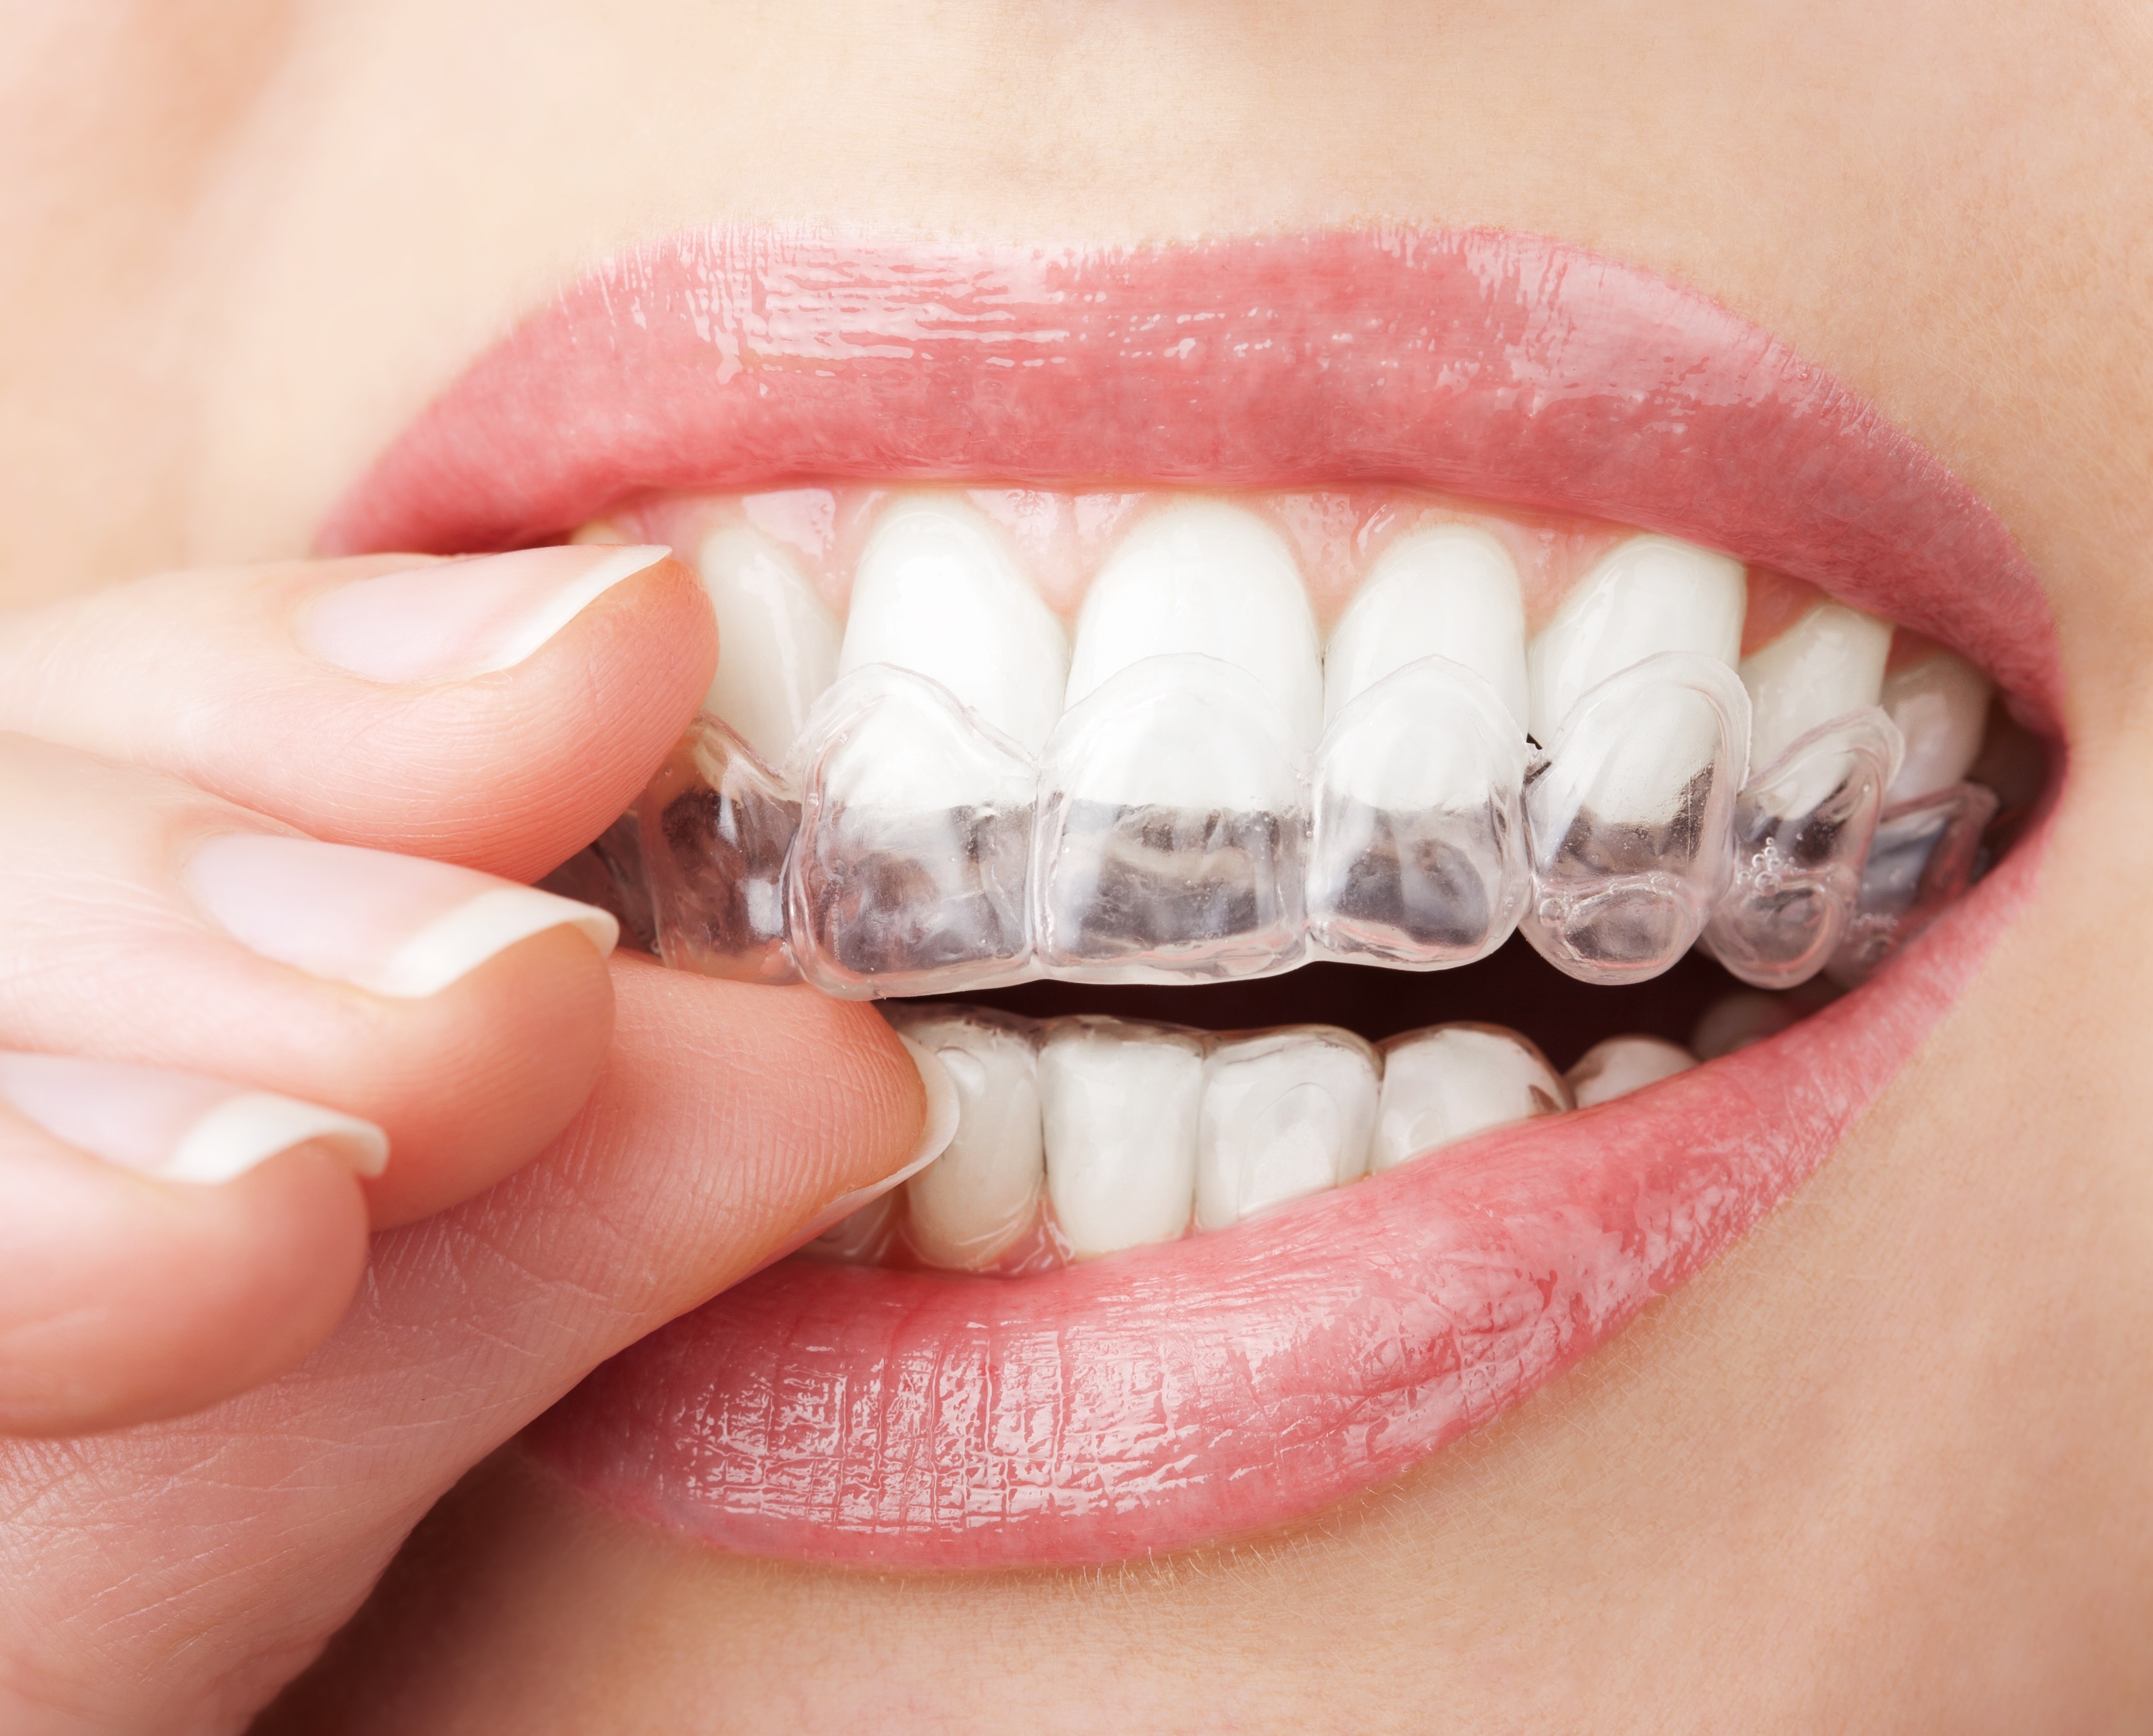 Where can I get 94403 Invisalign?